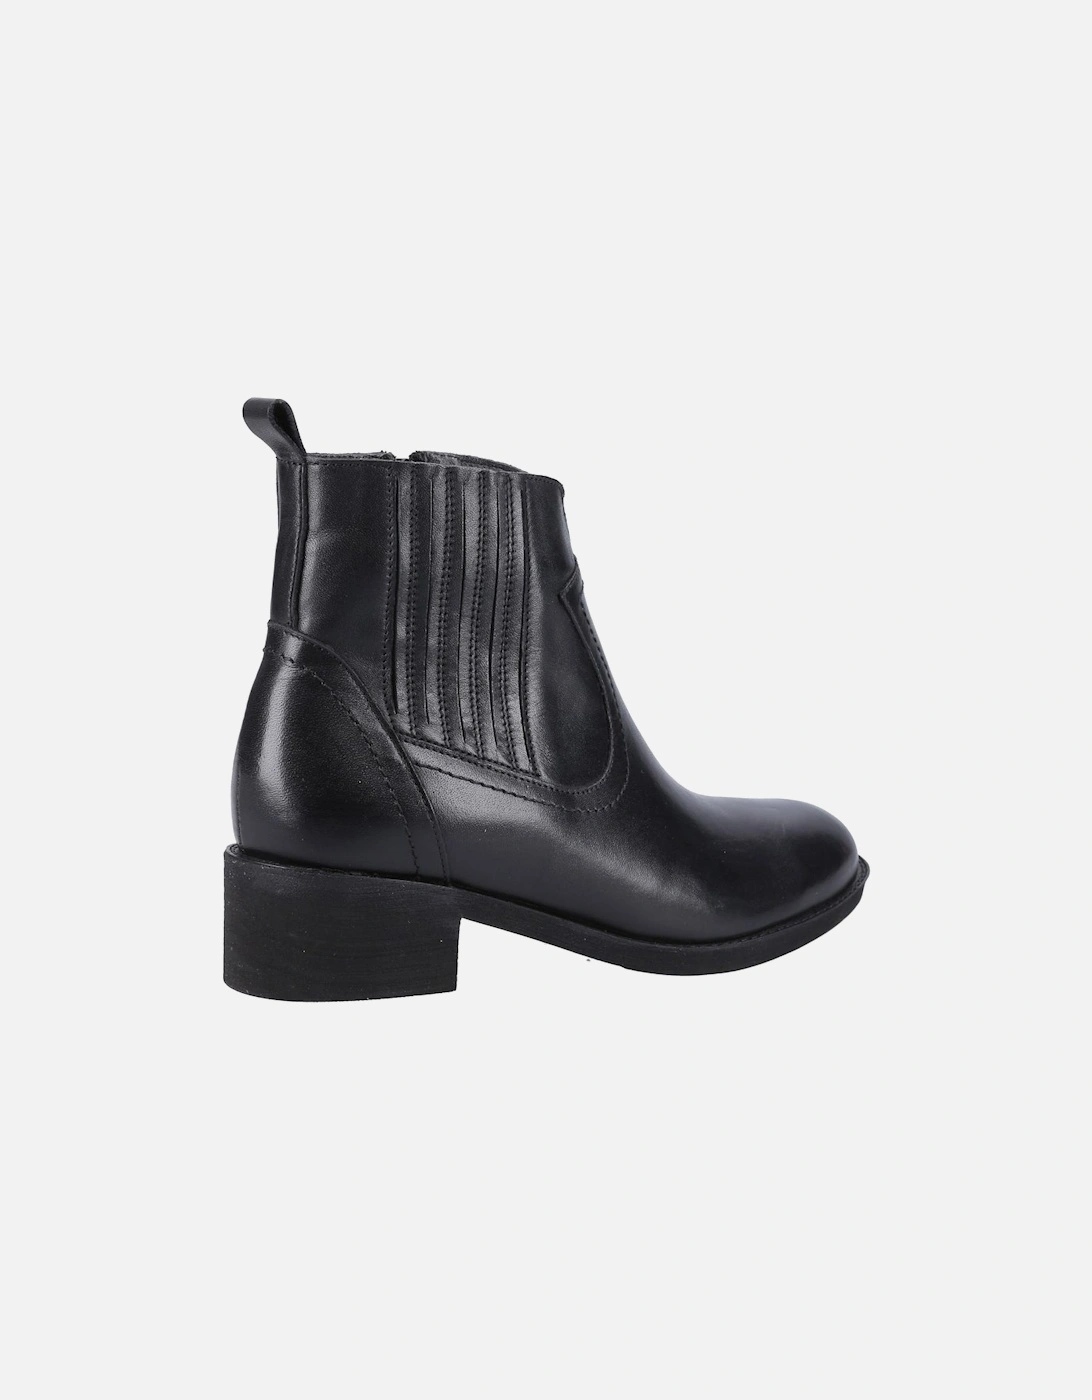 Georgie Womens Ankle Boots